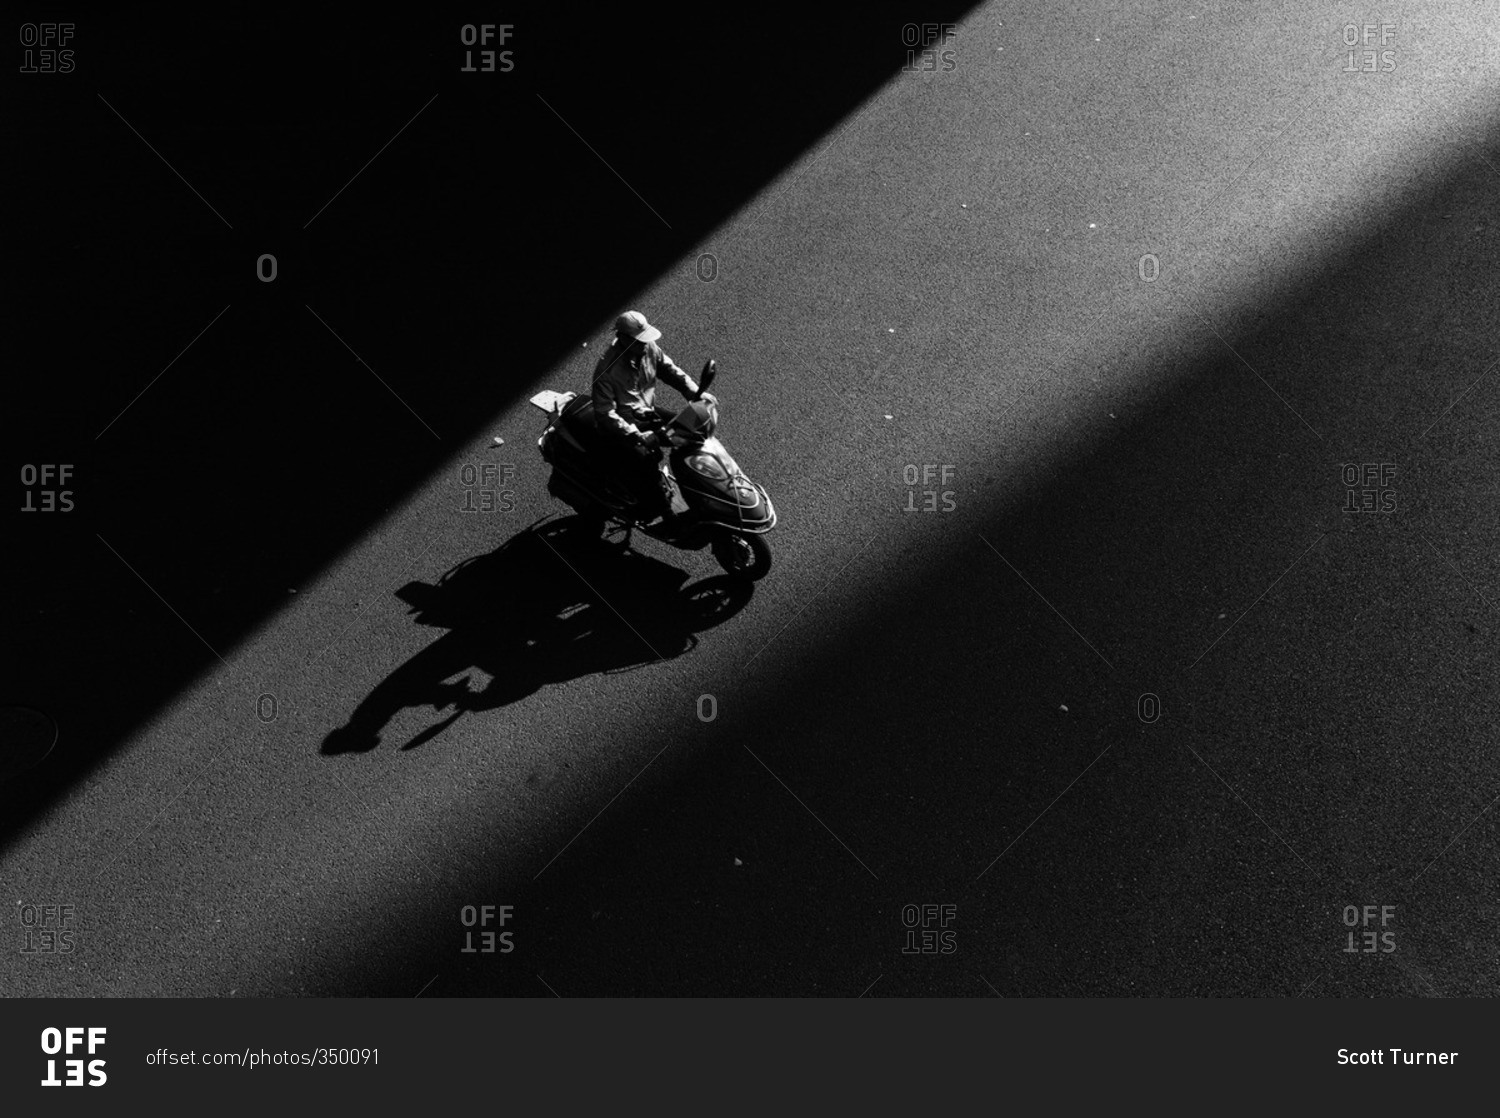 Overhead view of scooter rider passing through a ray of sunlight